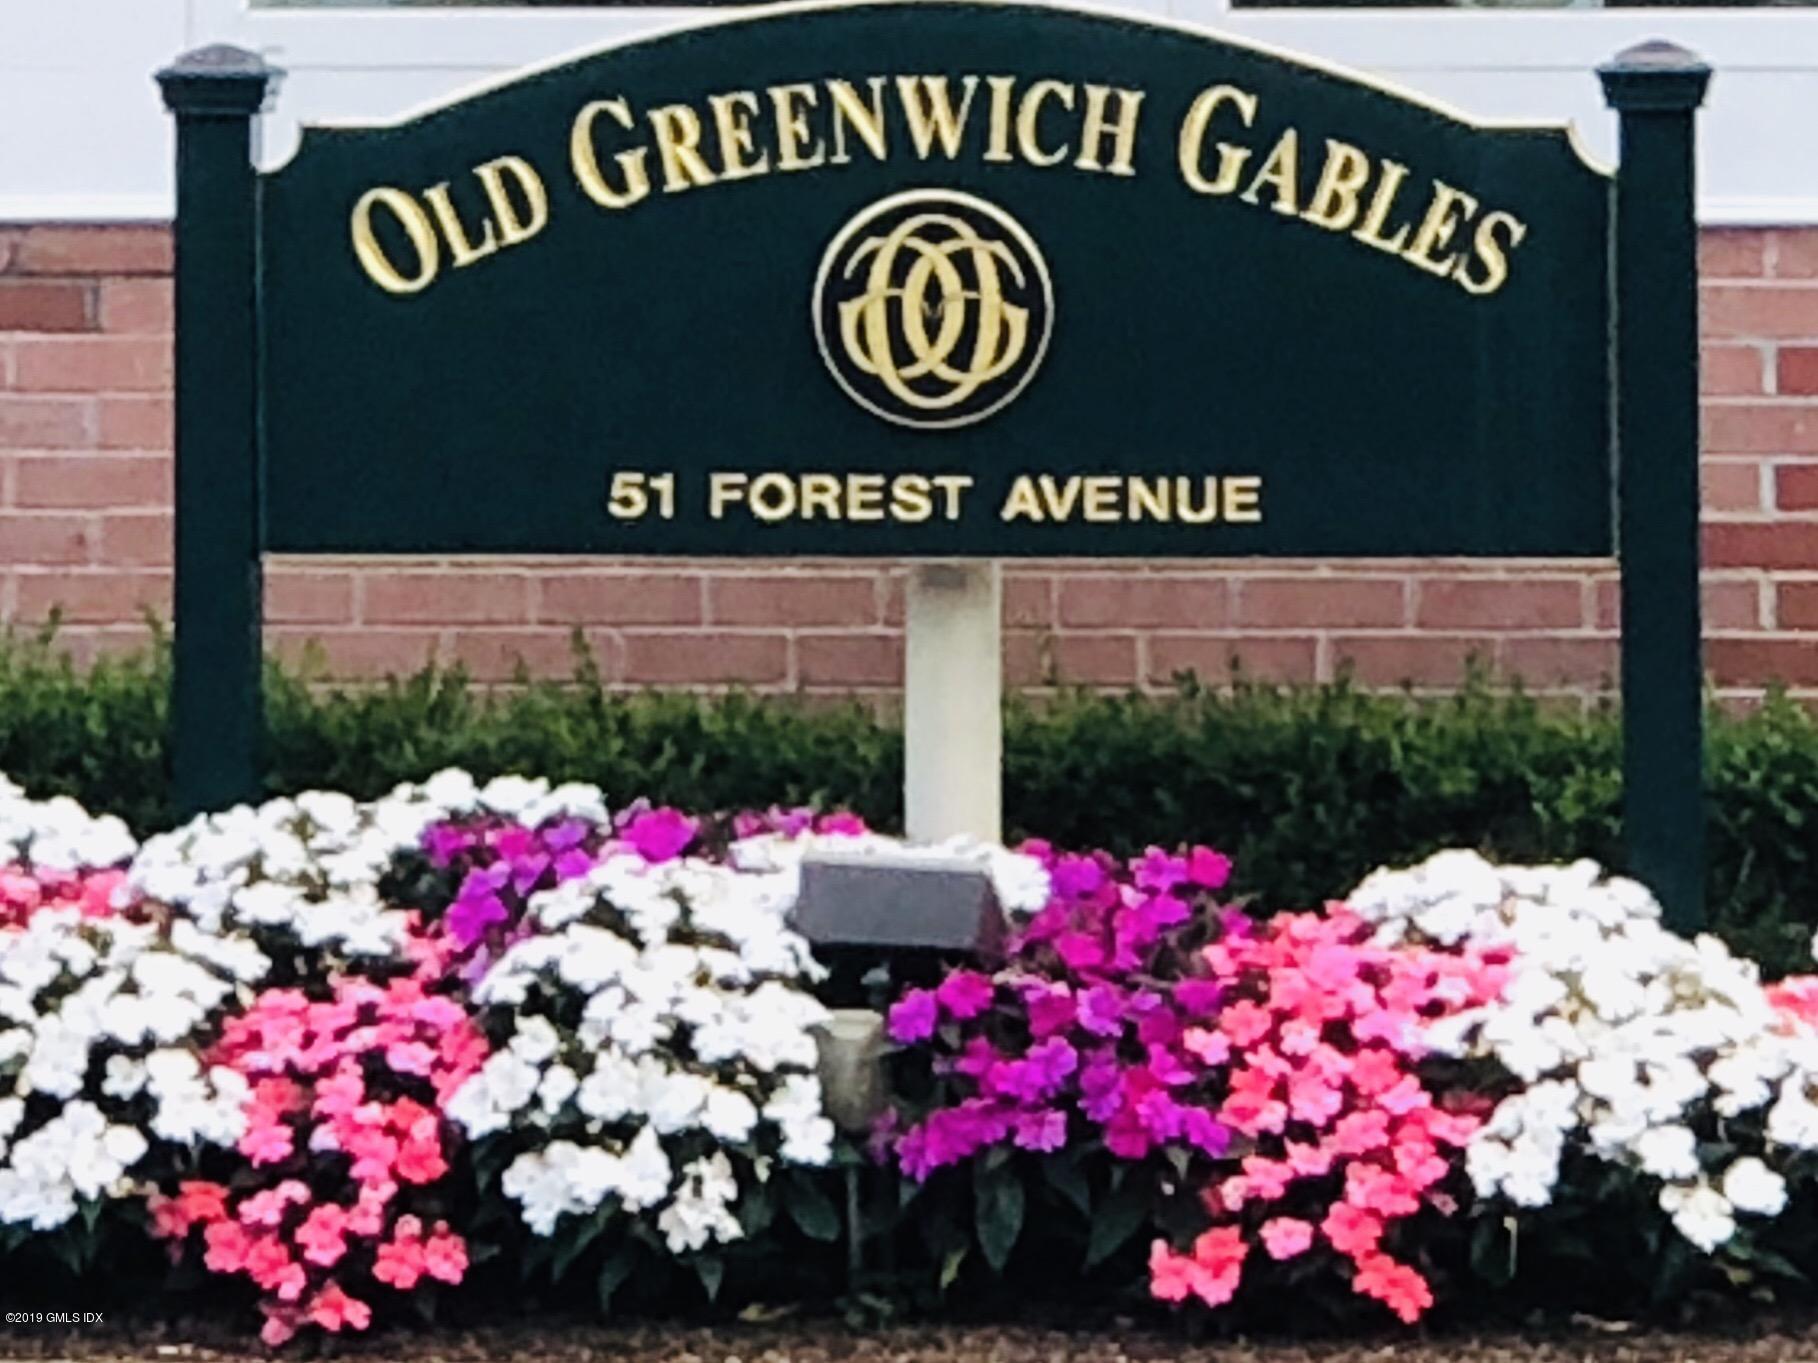 Rental Property at 51 Forest Avenue, Old Greenwich, Connecticut - Bedrooms: 1 
Bathrooms: 2  - $5,800 MO.